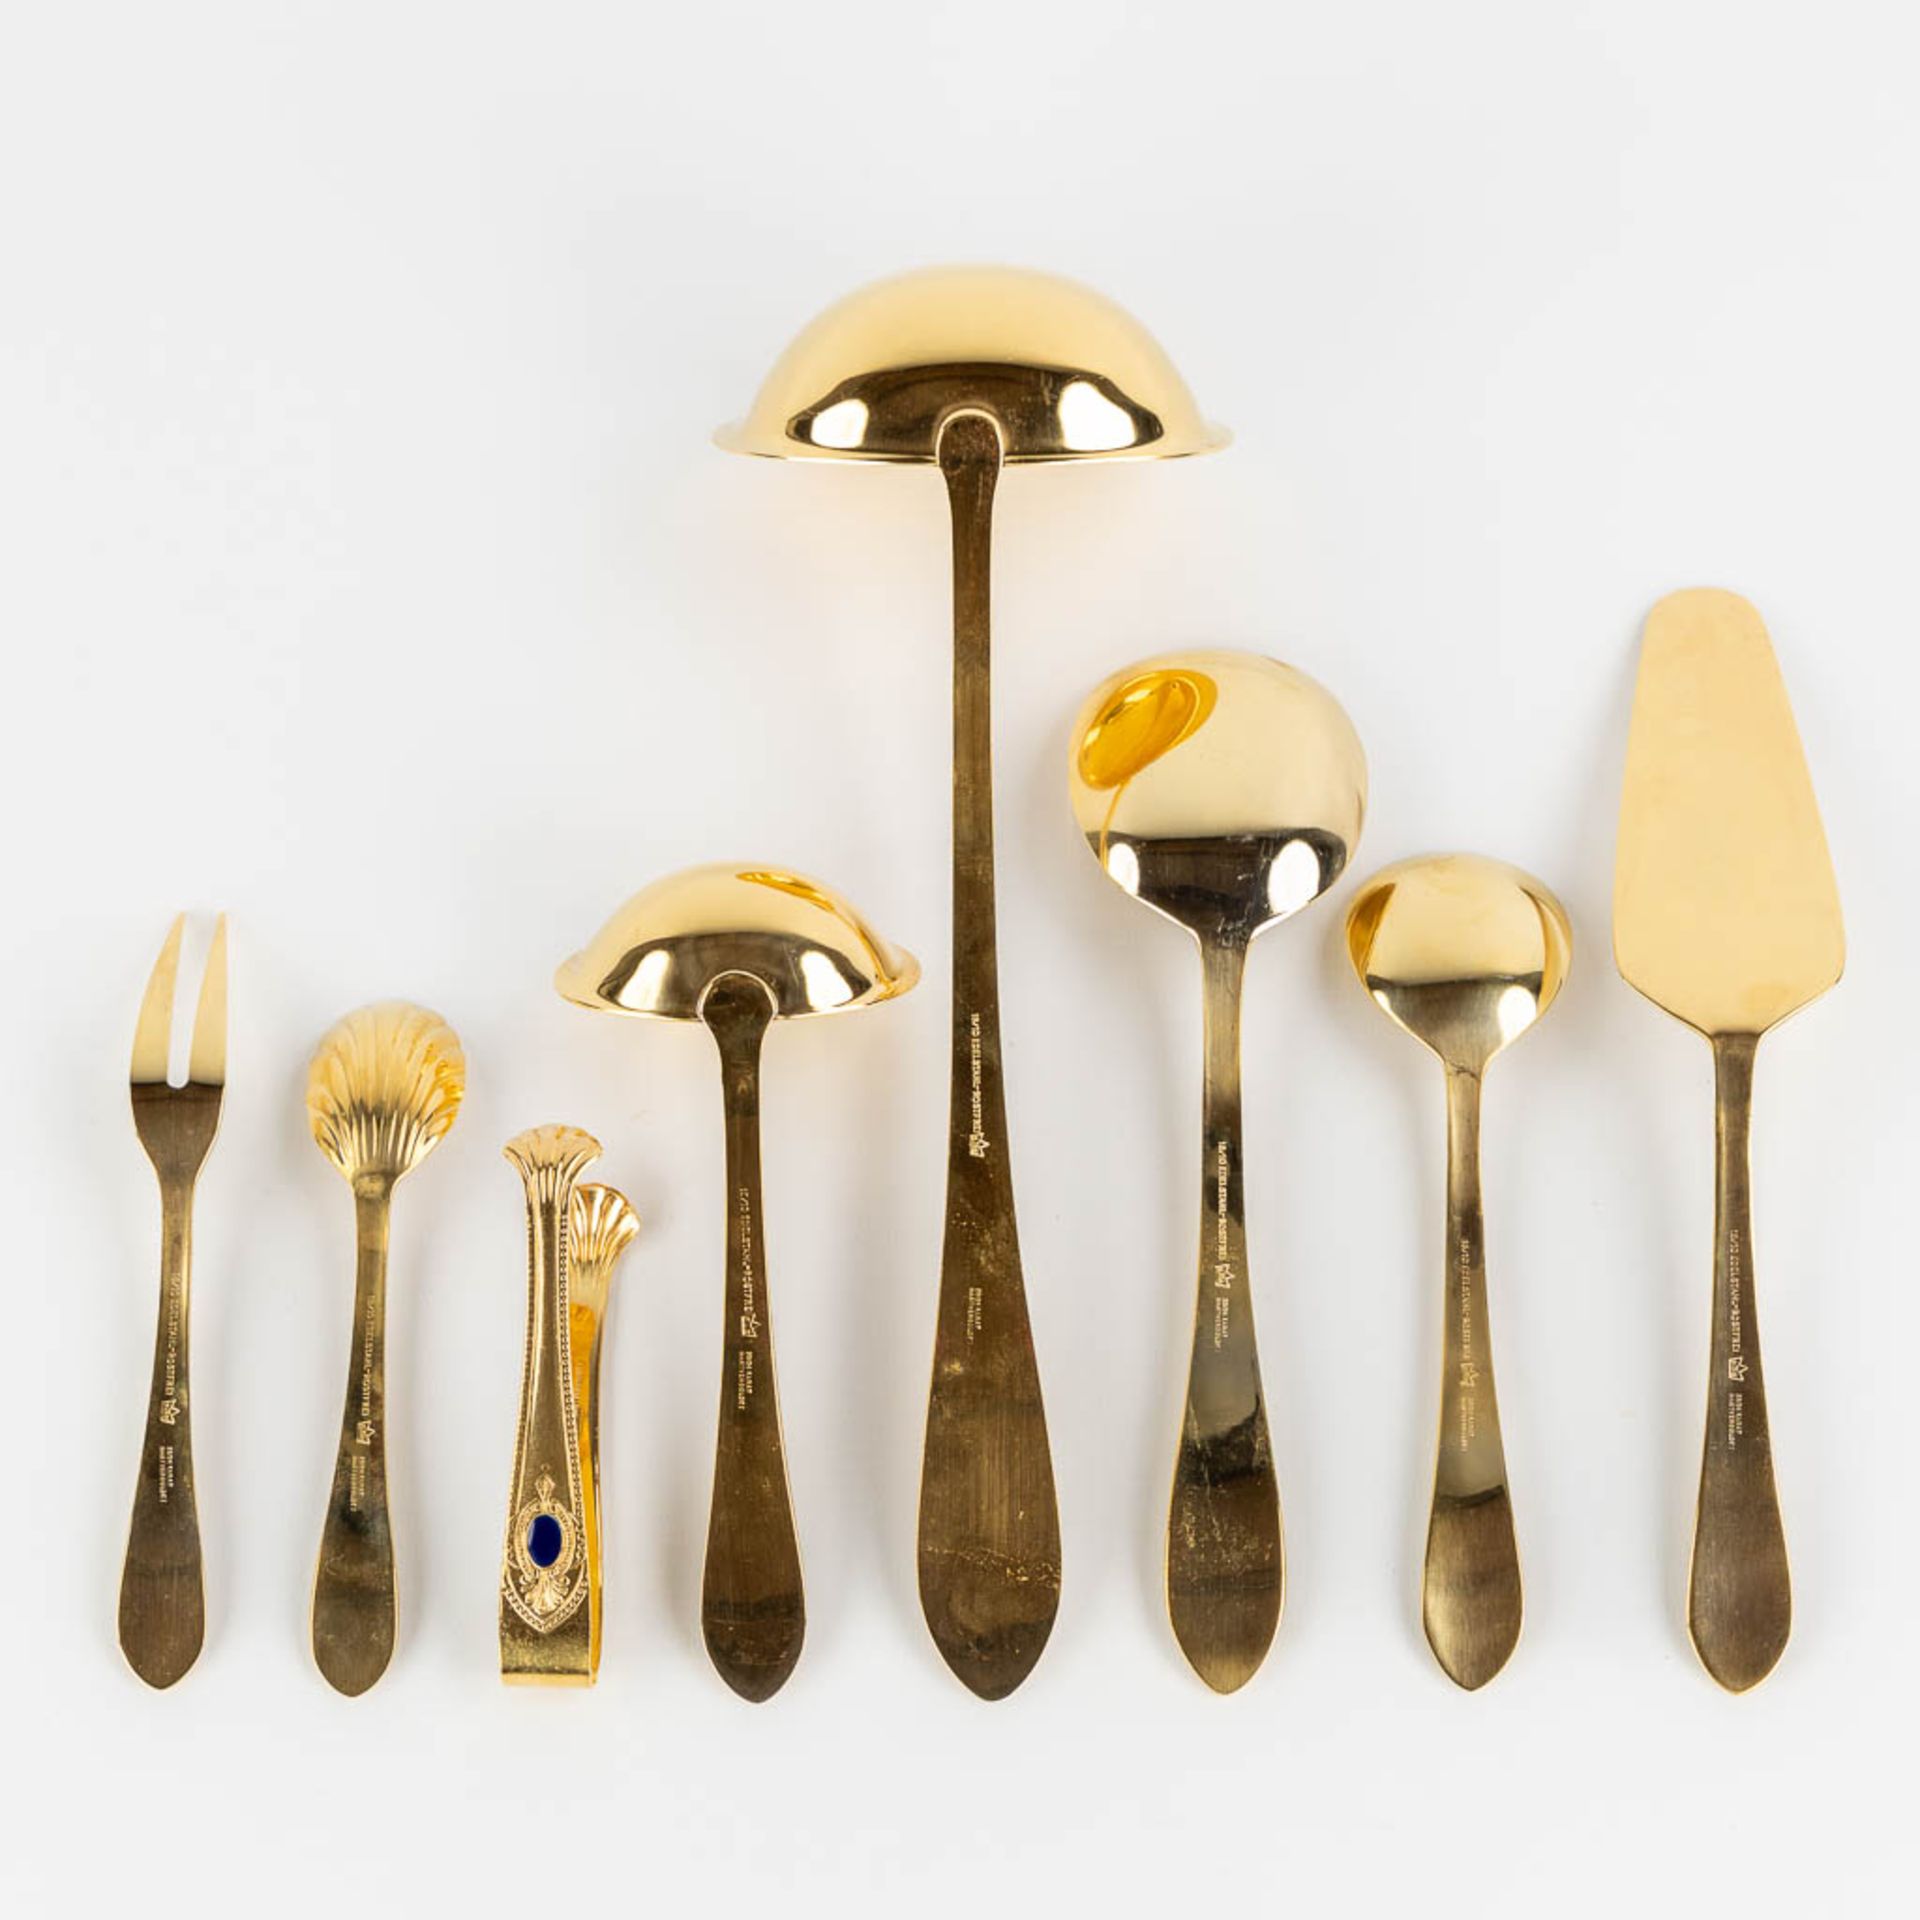 A gold-plated 'Bestecke Solingen' flatware cutlery set, made in Germany. (L:33 x W:45,5 x H:9,5 cm) - Image 9 of 11